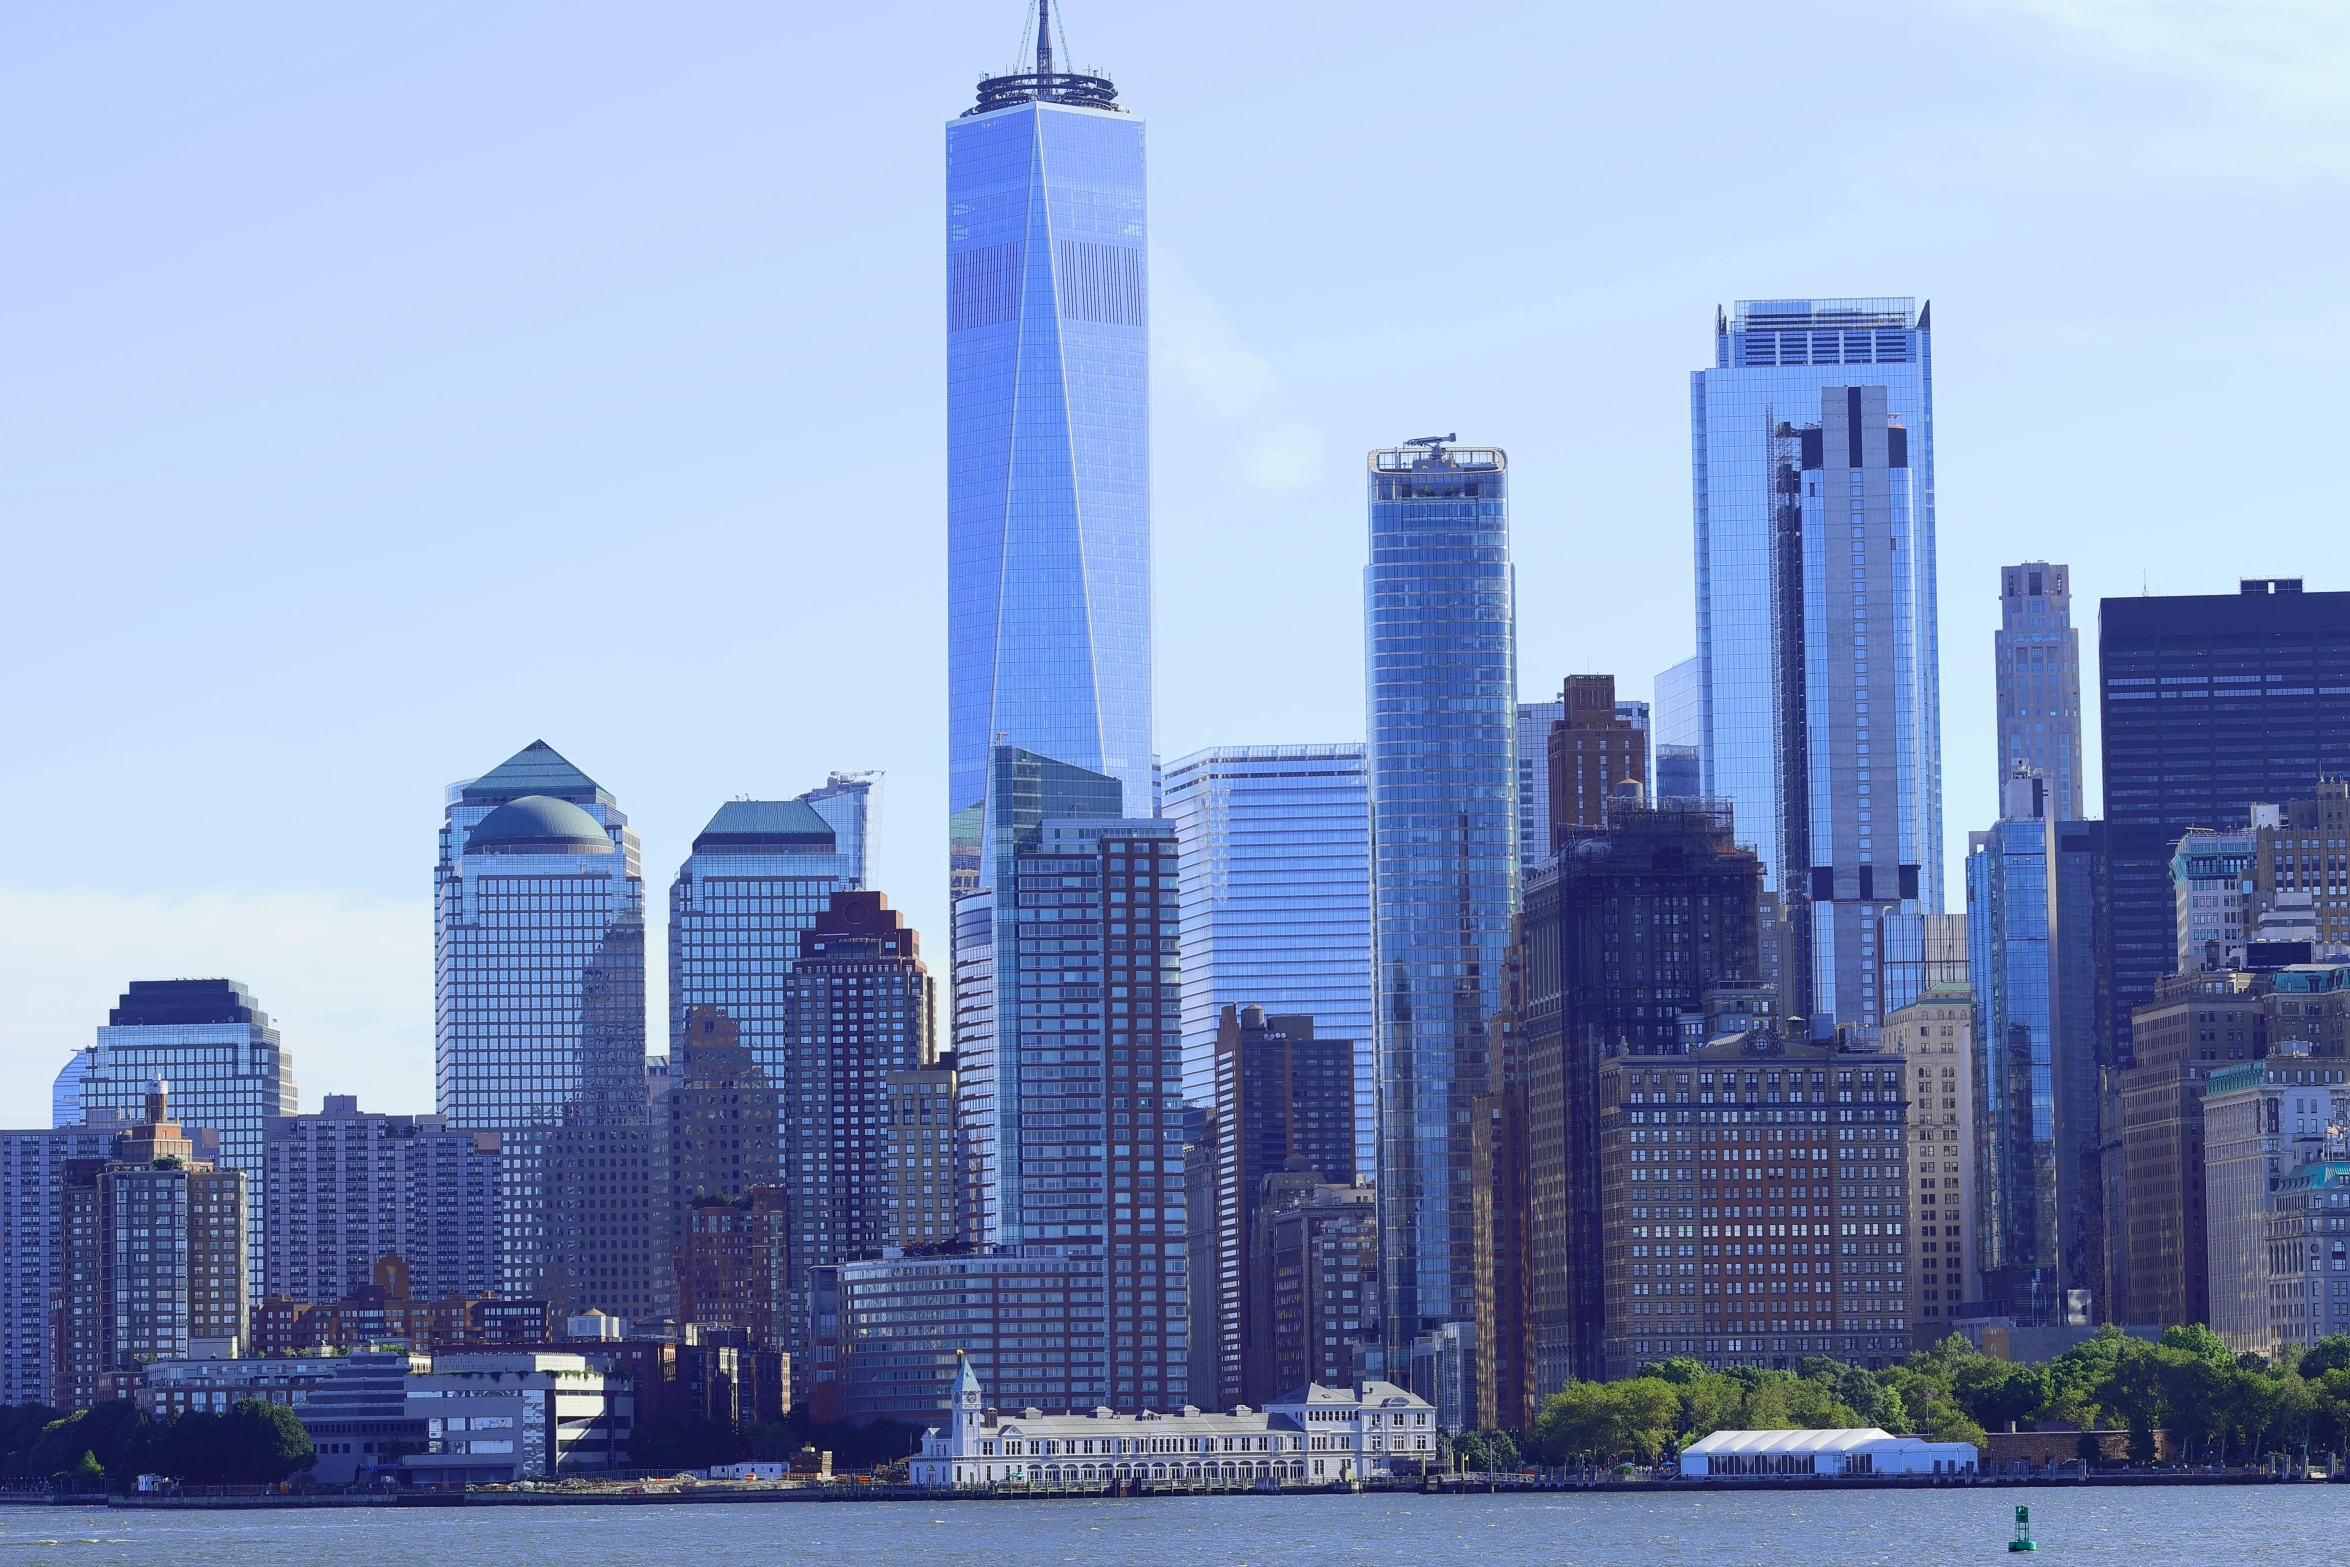 an image of the lower skyline of manhattan as seen from the water